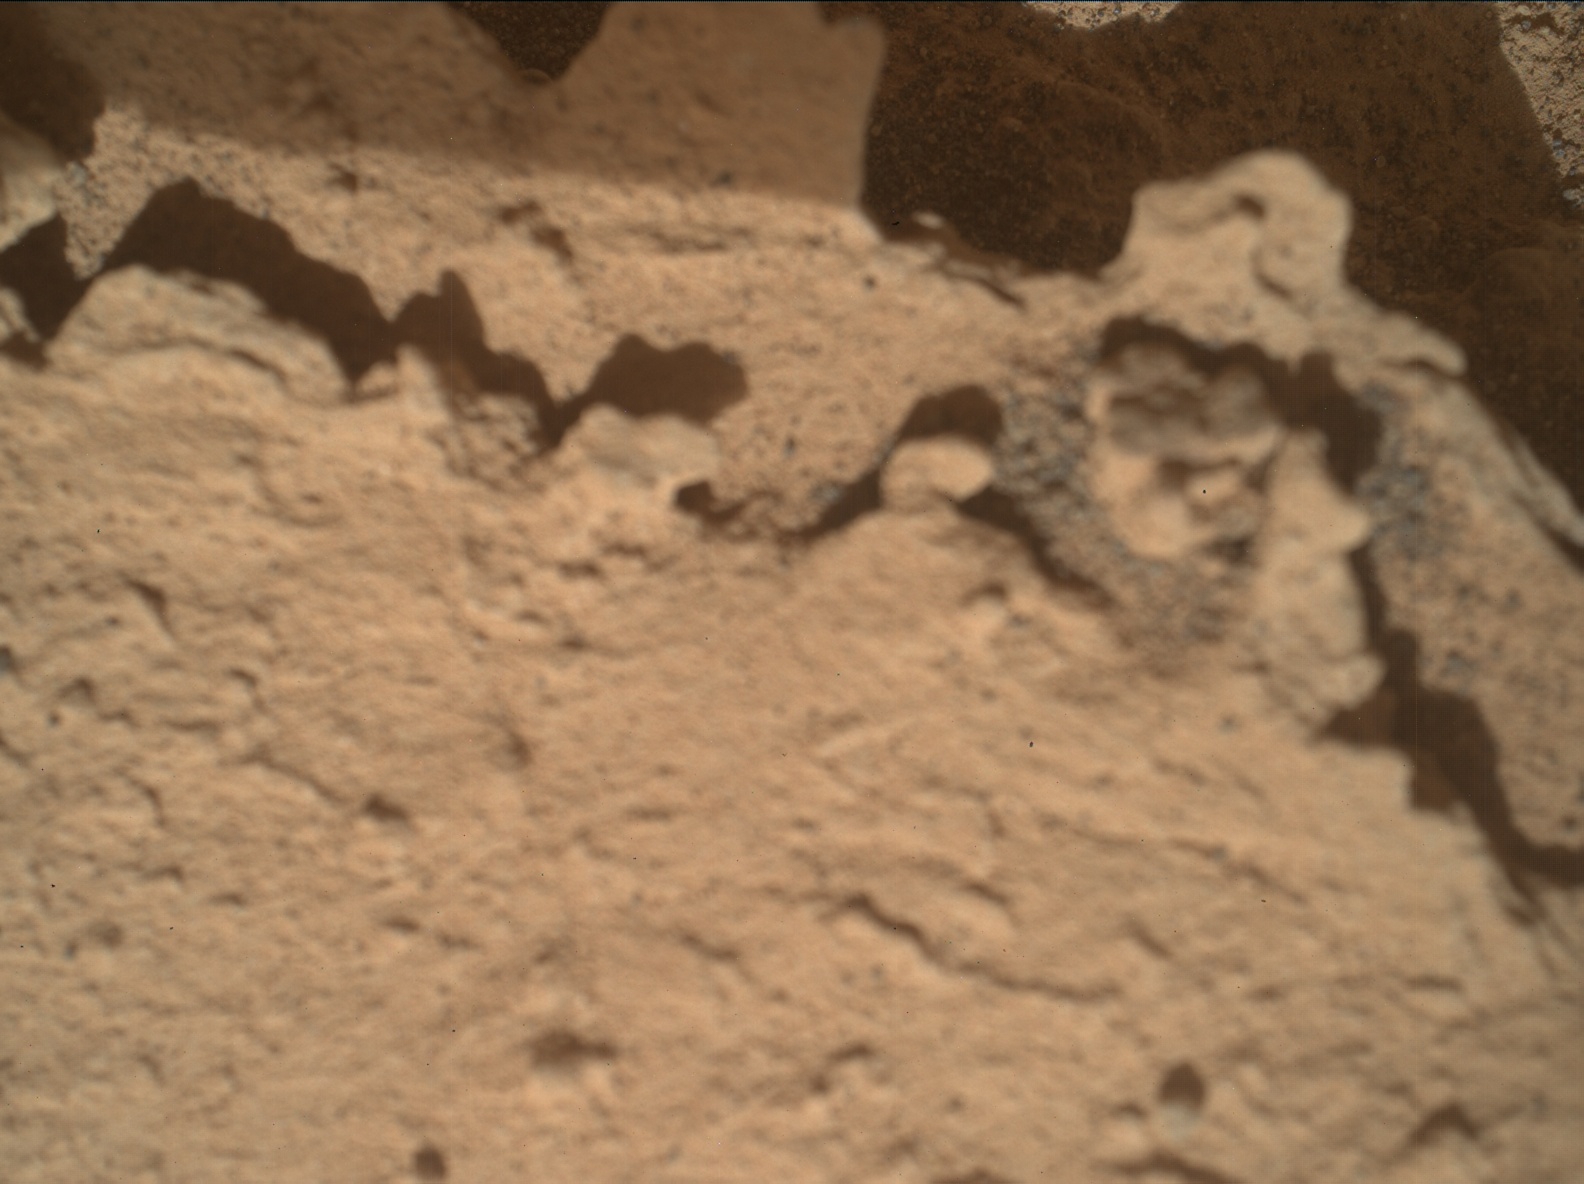 Nasa's Mars rover Curiosity acquired this image using its Mars Hand Lens Imager (MAHLI) on Sol 3462